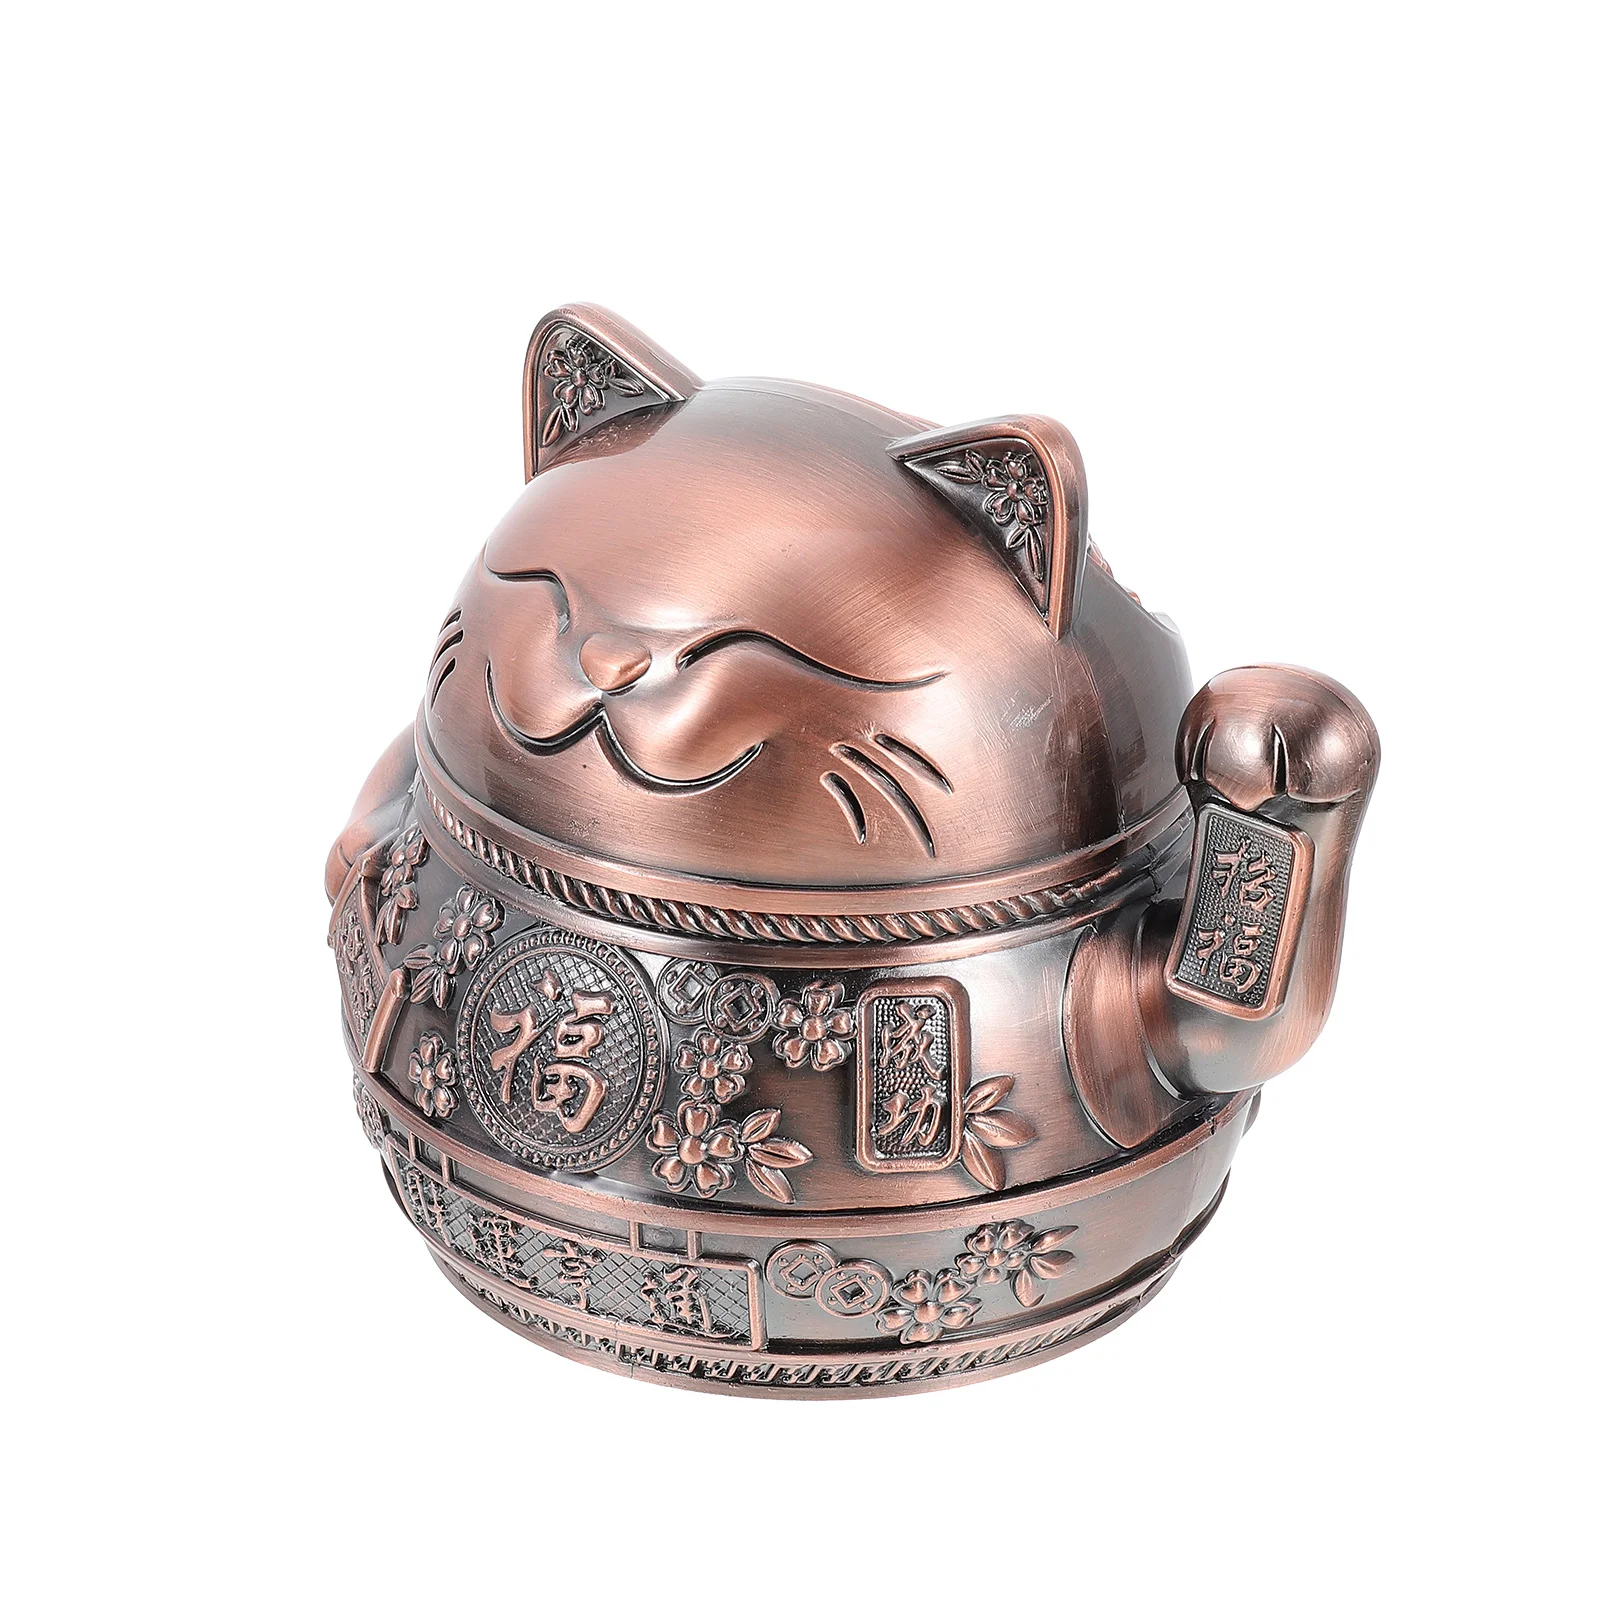 

Fomiyes Home Decor Ashtray Lucky Cat Ash Tray Holder Table Home Bar Car Decor Smokers Office Decor